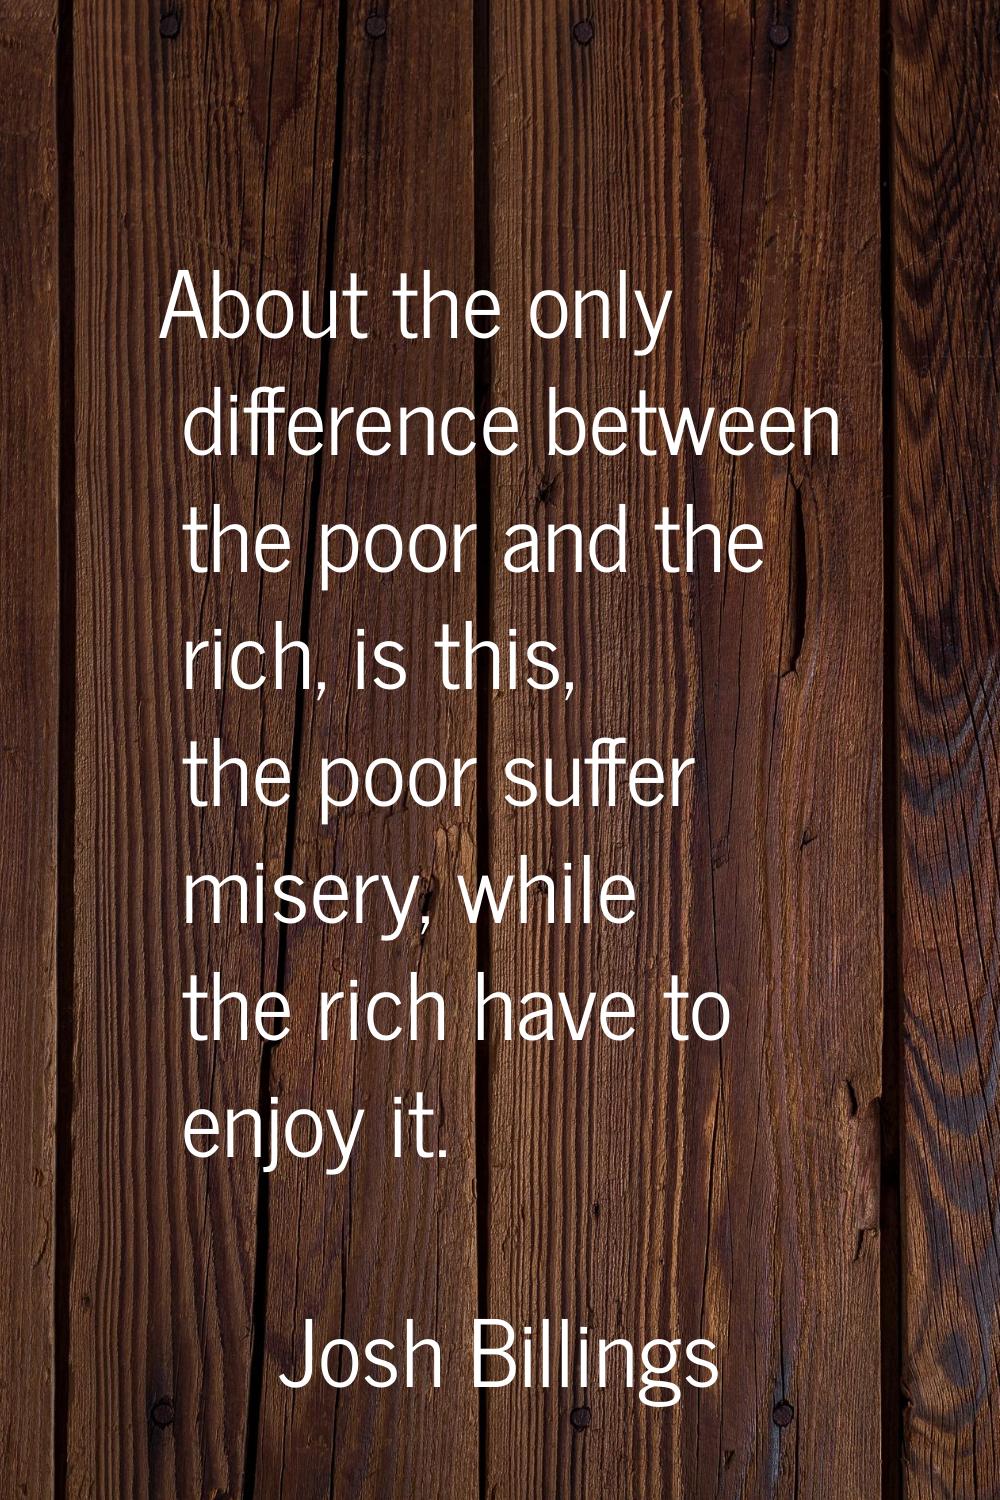 About the only difference between the poor and the rich, is this, the poor suffer misery, while the